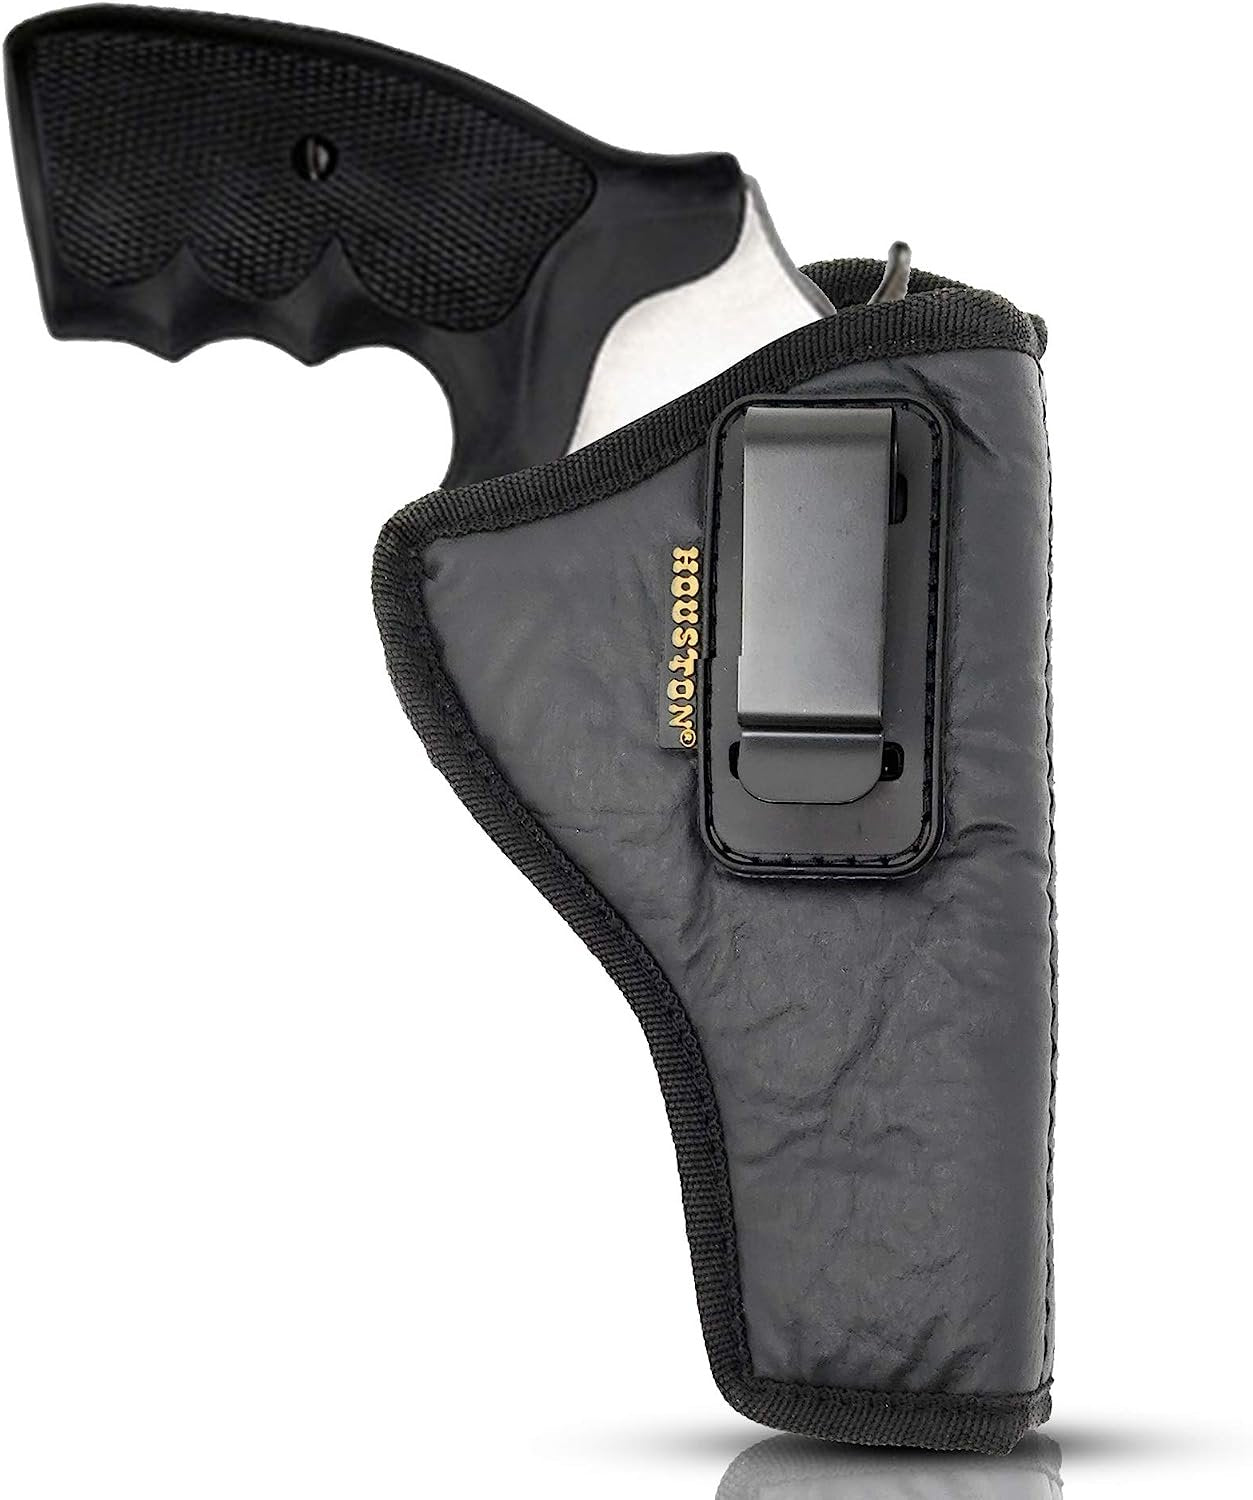 7 New Concealed-Carry Holsters for Any Lifestyle